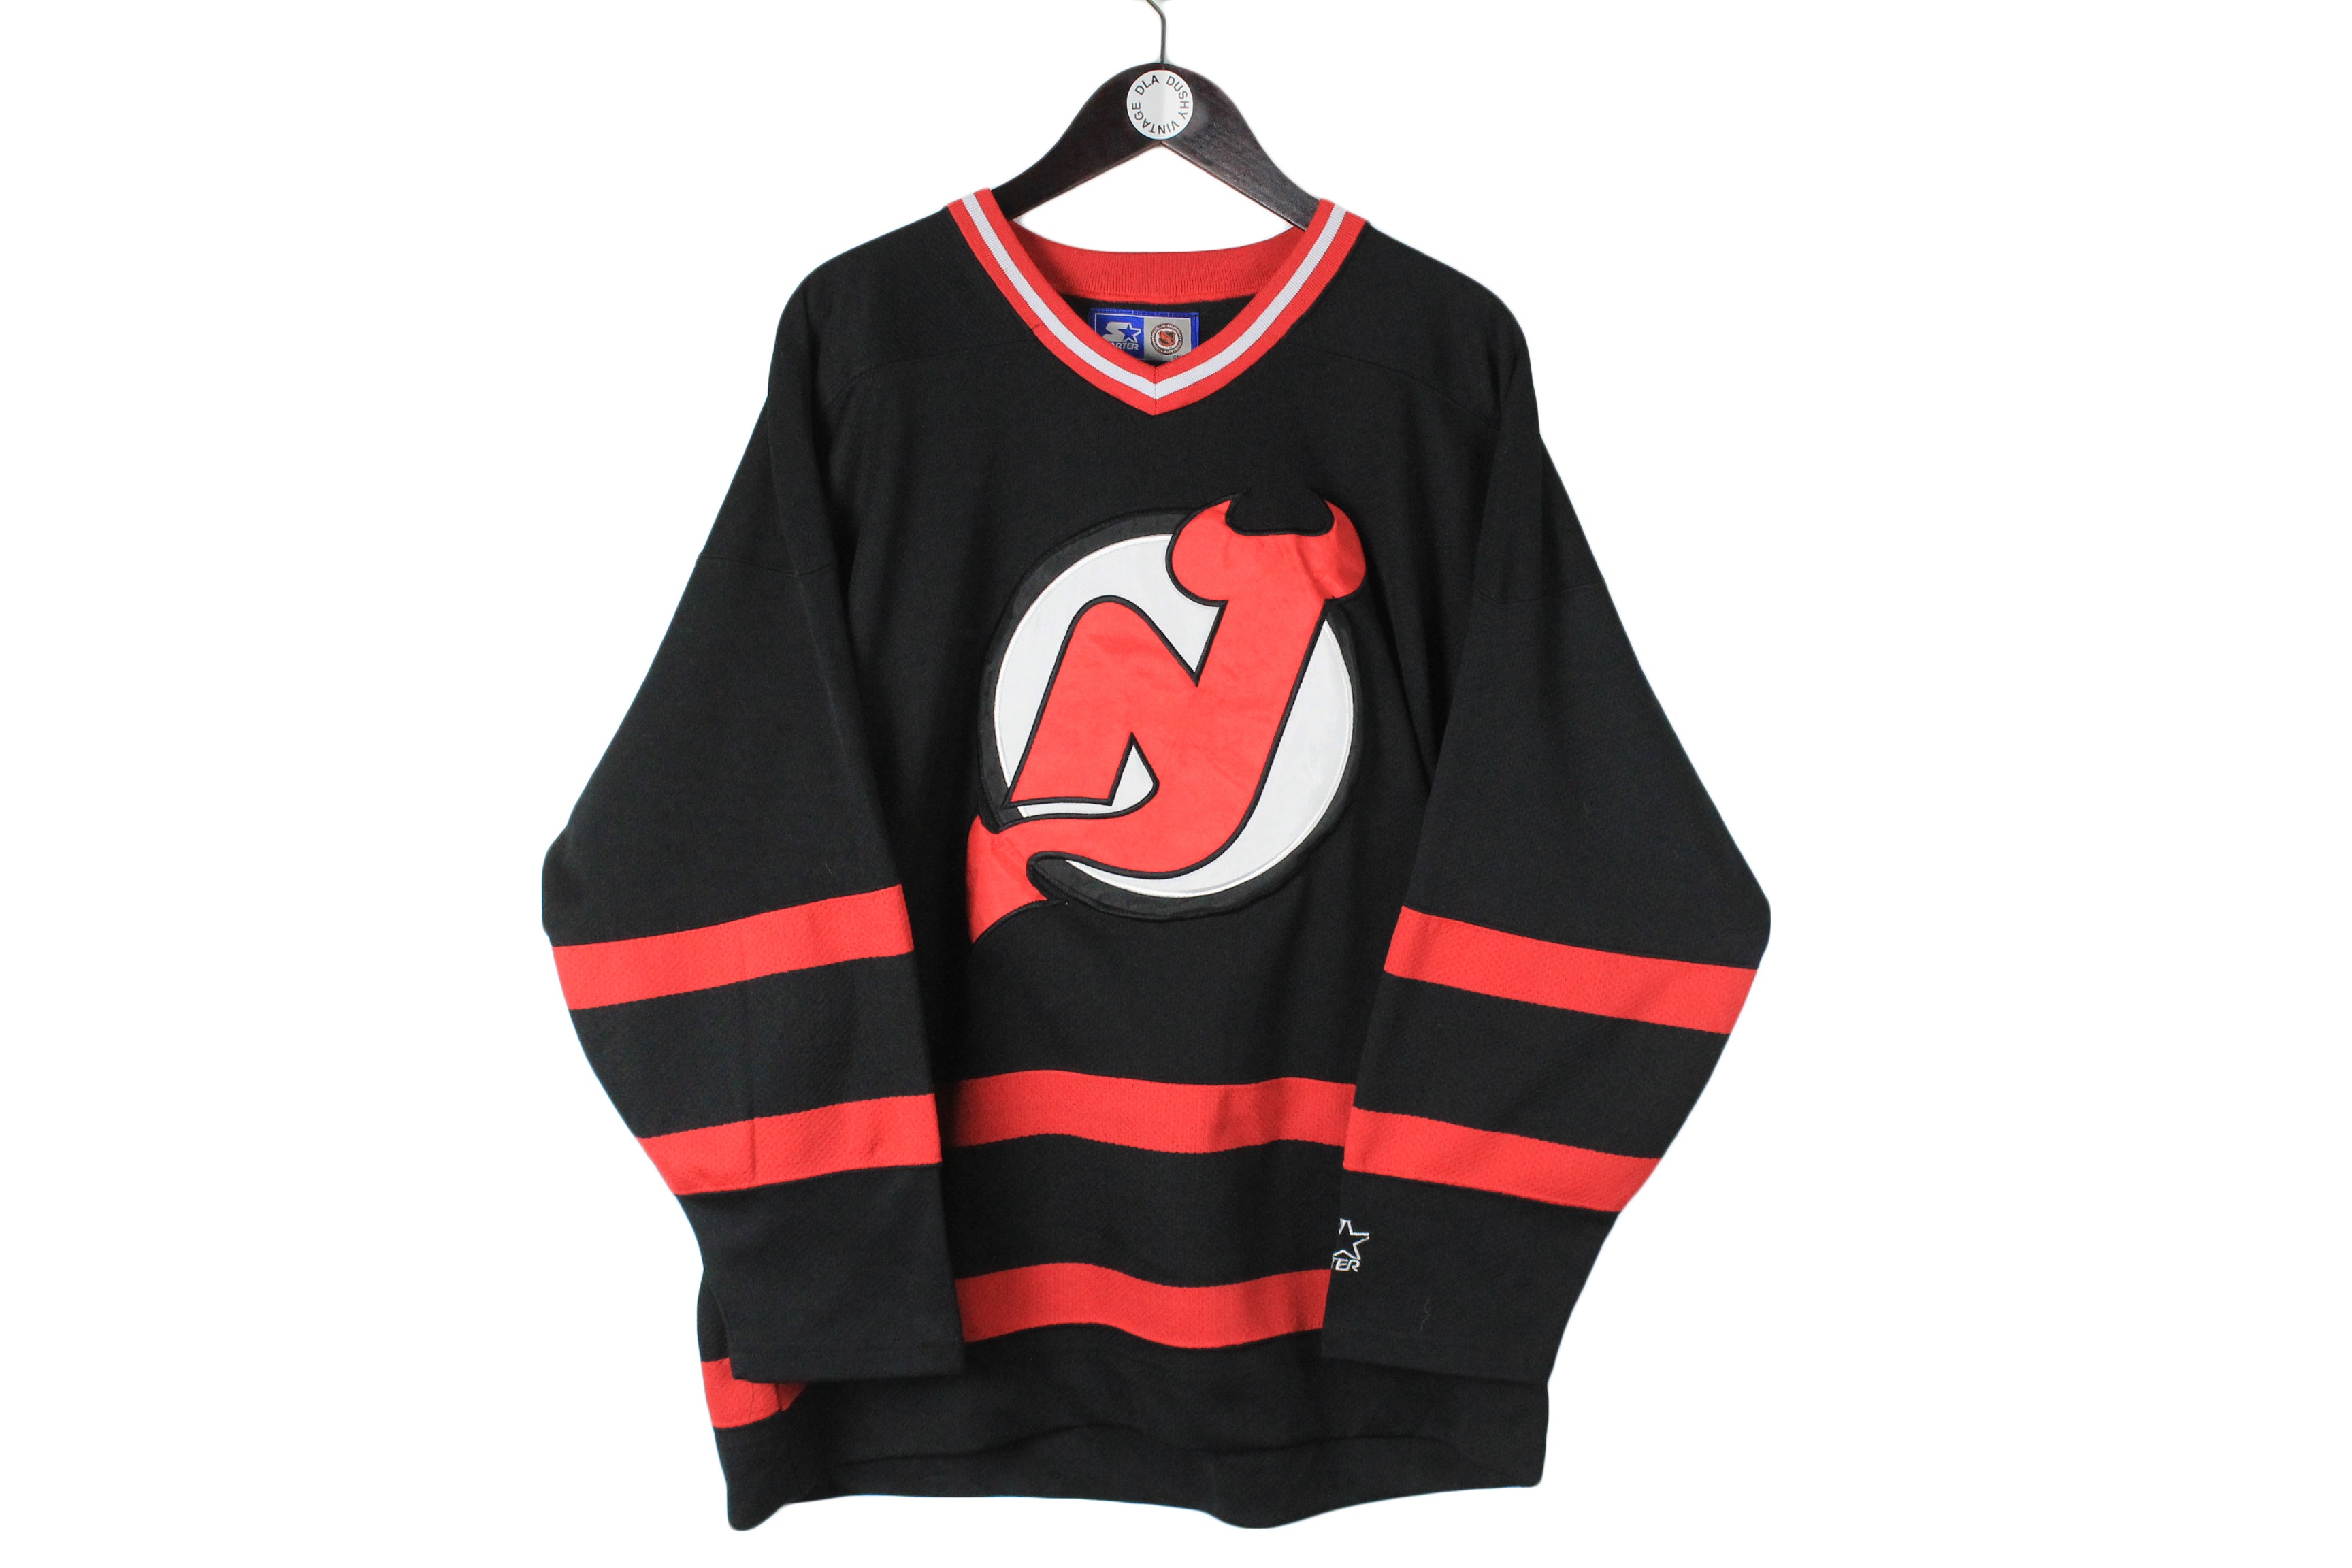 Nj Devils Sweatshirt, Vintage 90s New Jersey Hockey Crewneck Sweatshirt -  Bring Your Ideas, Thoughts And Imaginations Into Reality Today